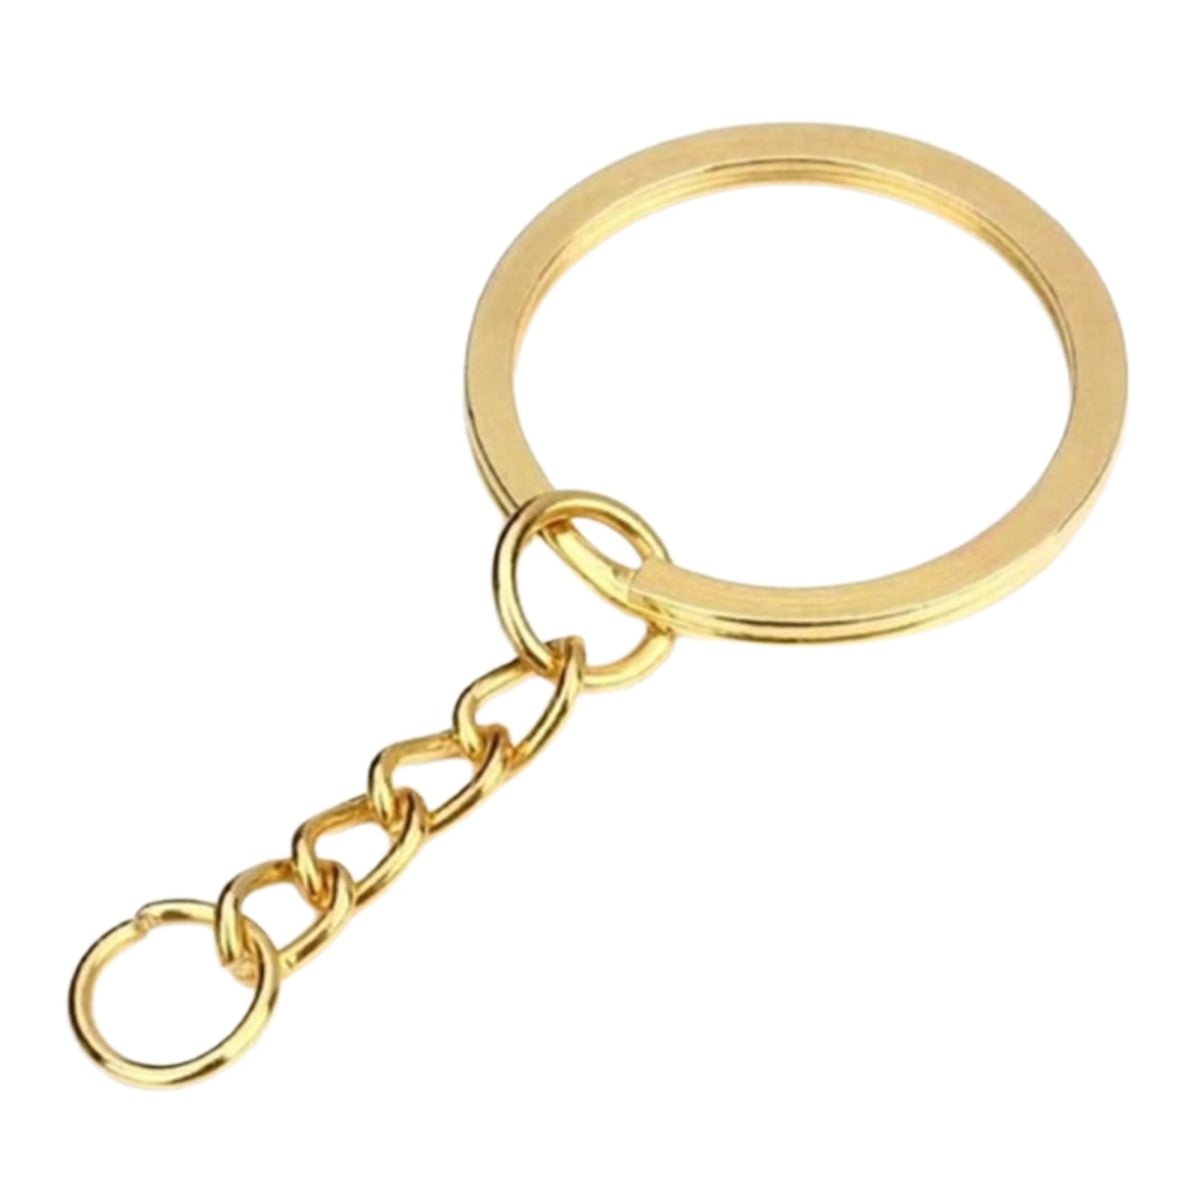 100pcs 25mm Gold Ancient Keyring Keychain Split Ring Chain Key Rings Key Chains - Gold - - Asia Sell